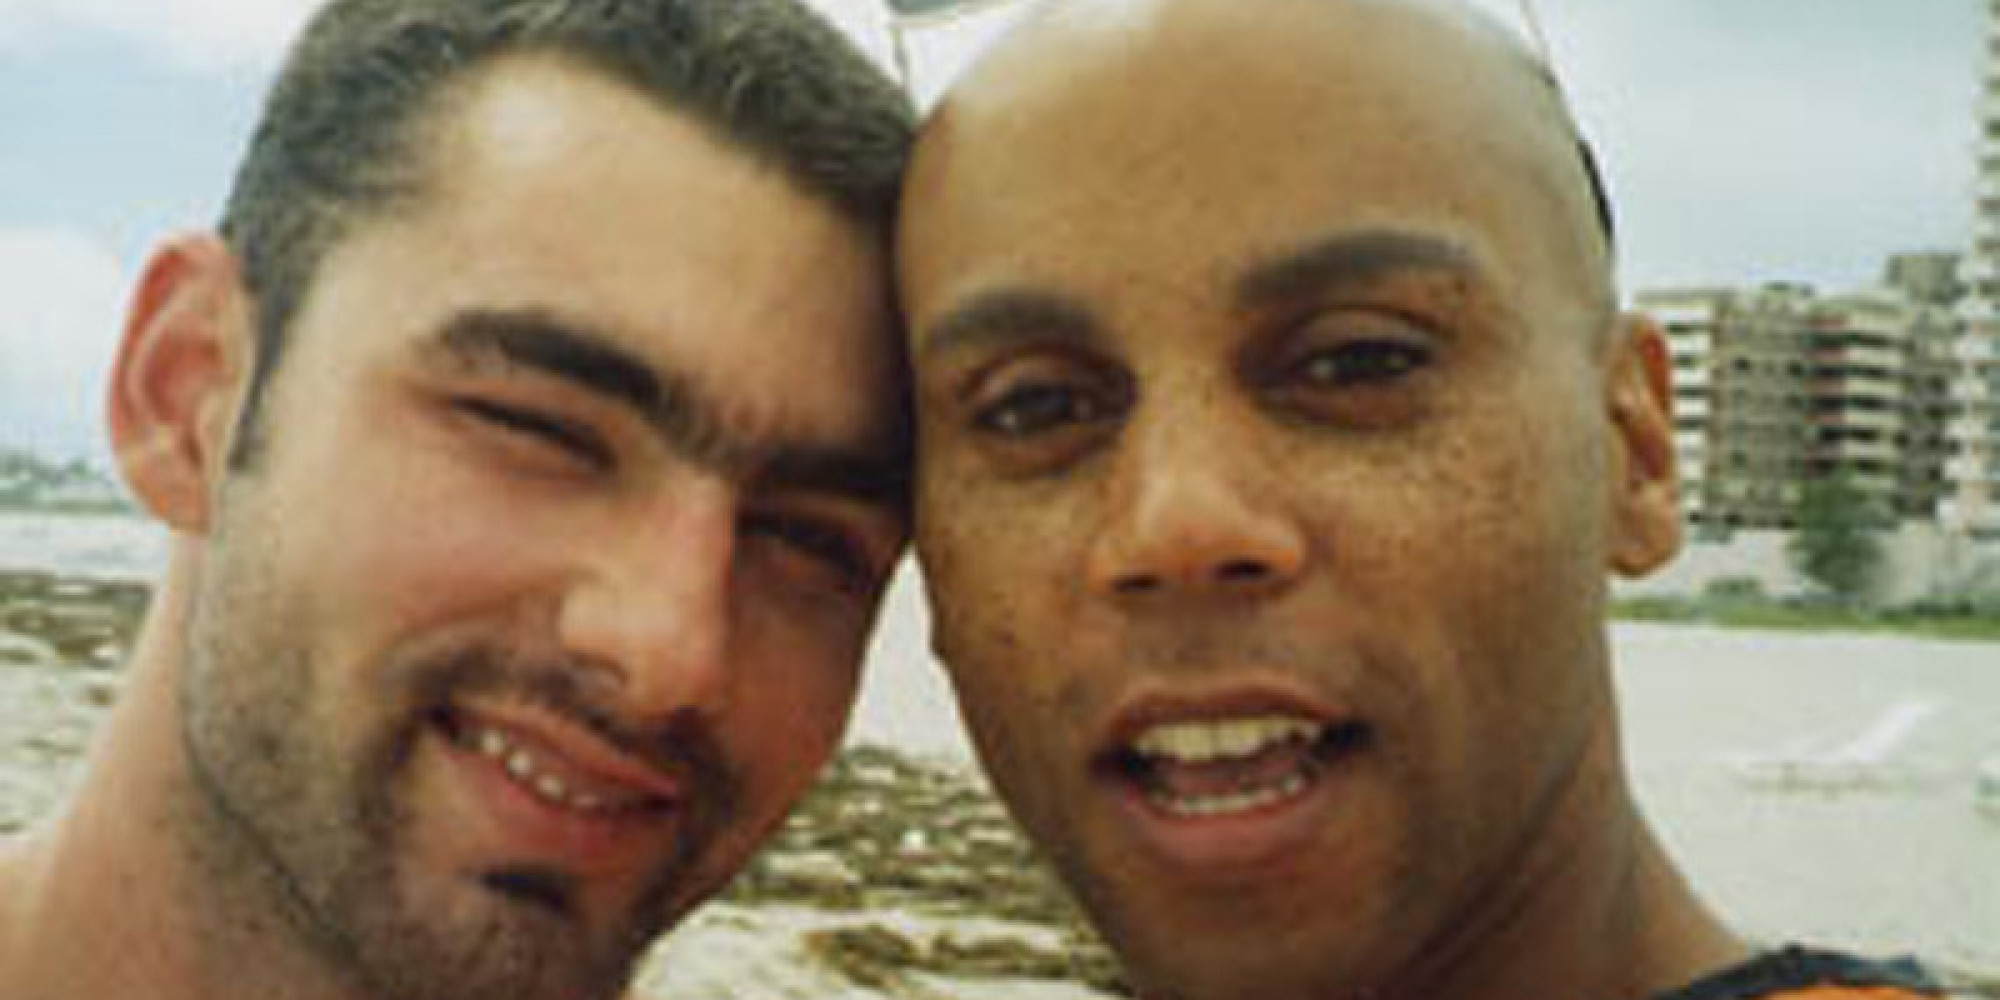 RuPaul's Partner Of 19 Years Is A Rancher From Wyoming (VIDEO) | HuffPost